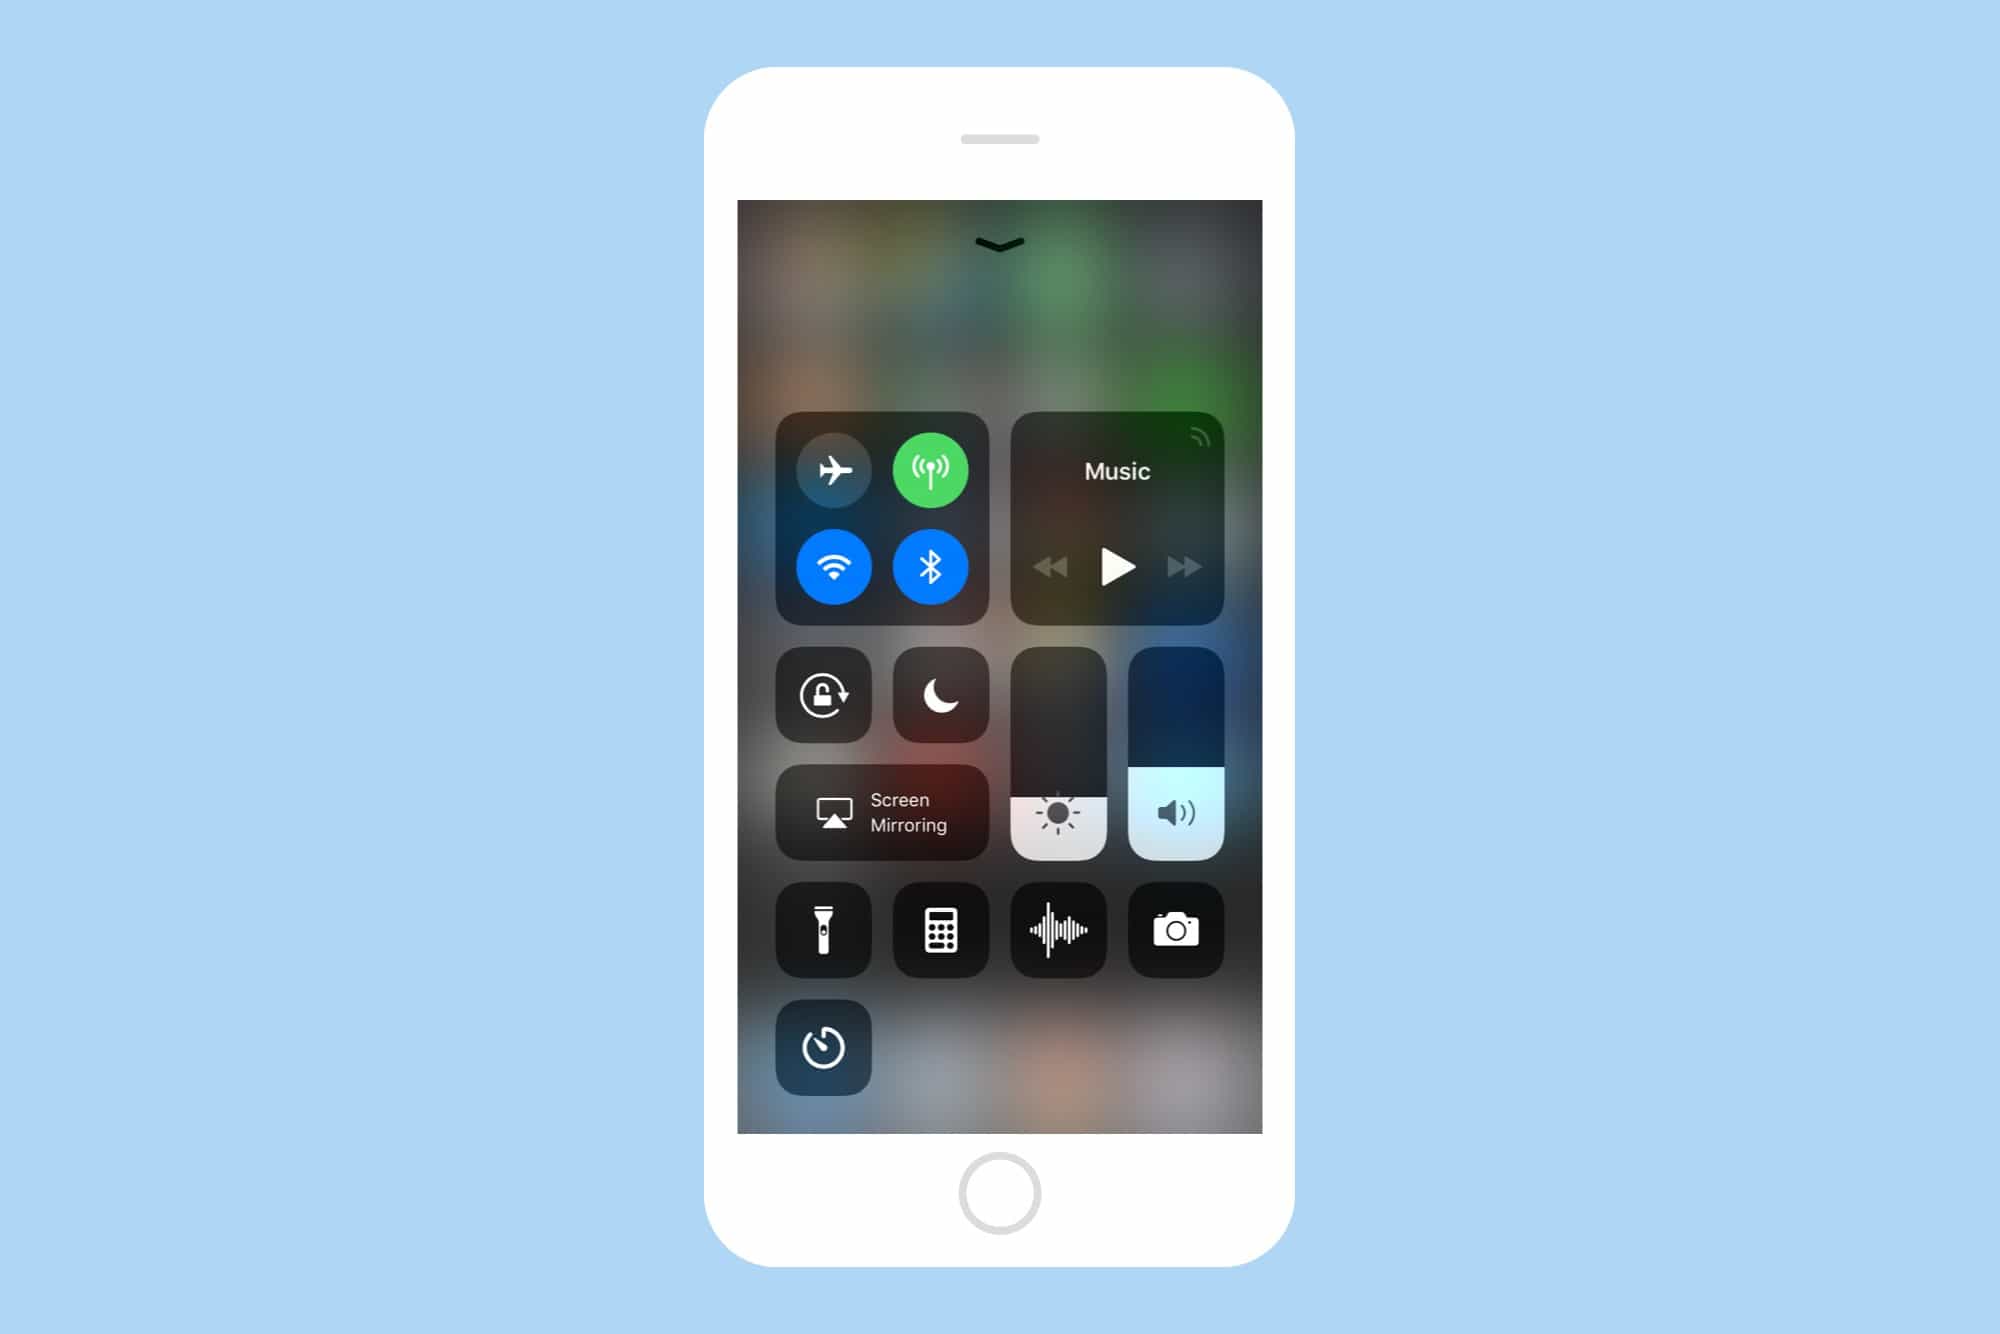 Bluetooth and Wi-Fi in iOS 11 control center